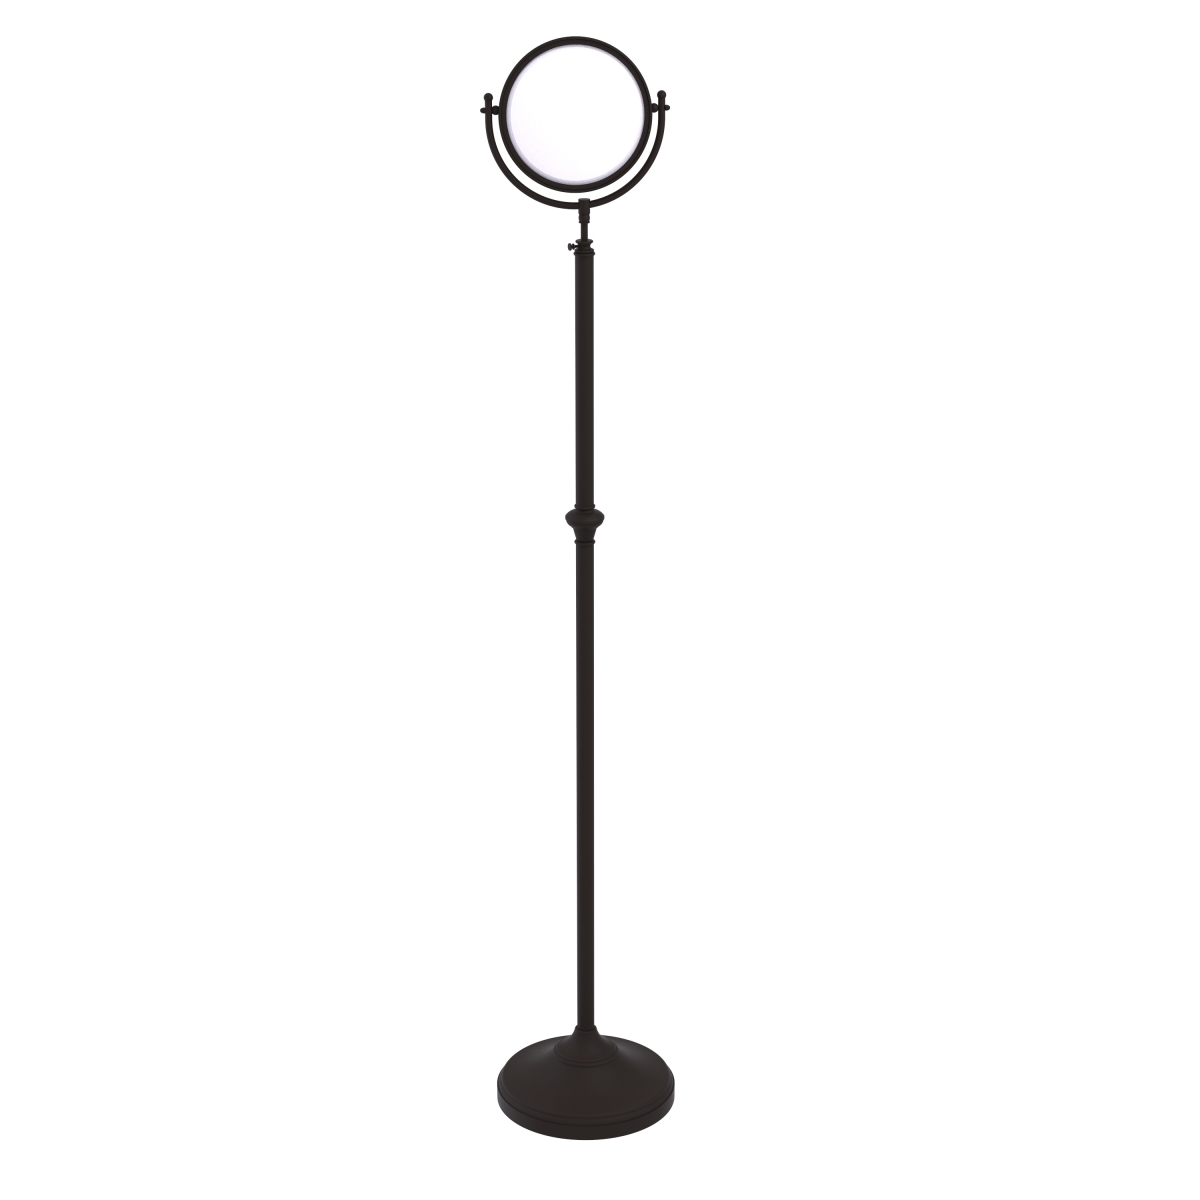 Allied Brass DMF-2-2X-ORB Adjustable Height Floor Standing Make-Up Mirror 8 in. Diameter with 2X Magnification, Oil Rubbed Bronze